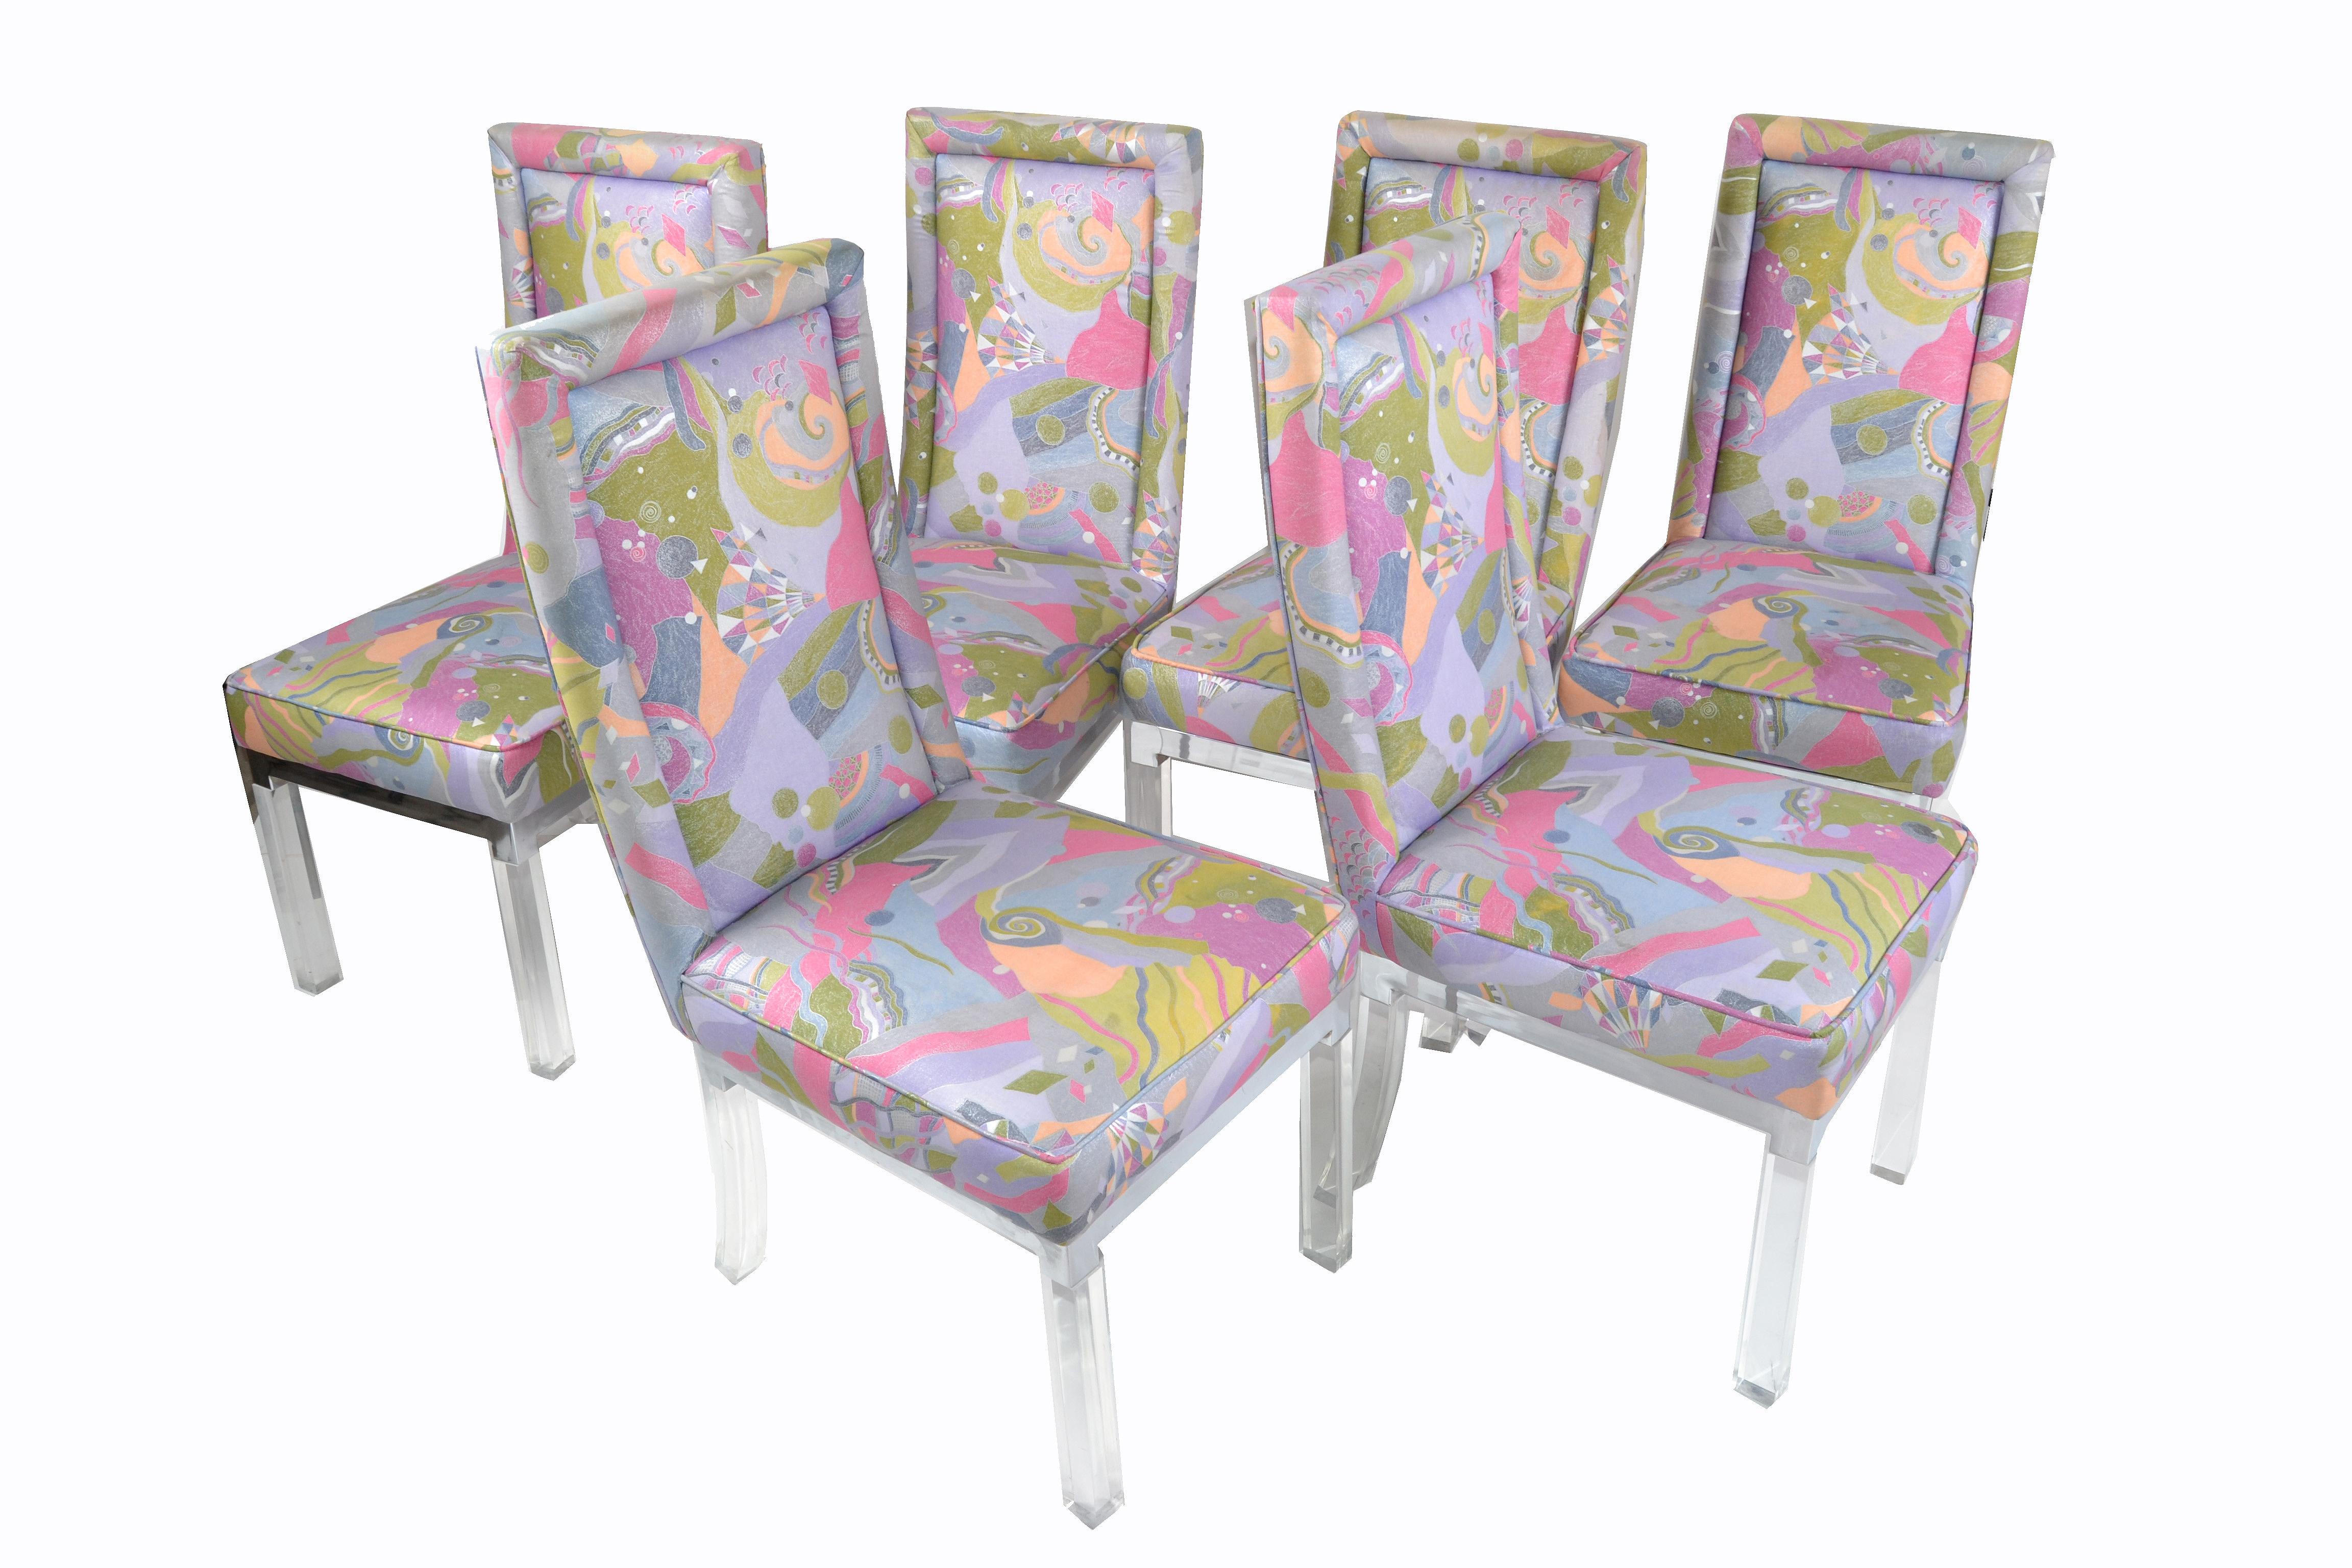 Set of 6 dining chairs with Lucite / acrylic legs, chrome seat frame and colorful fabric upholstery.
As we were told this is the original Fabric and it shows some light wear and little tear on 2 chairs. The Lucite is in very good condition and has